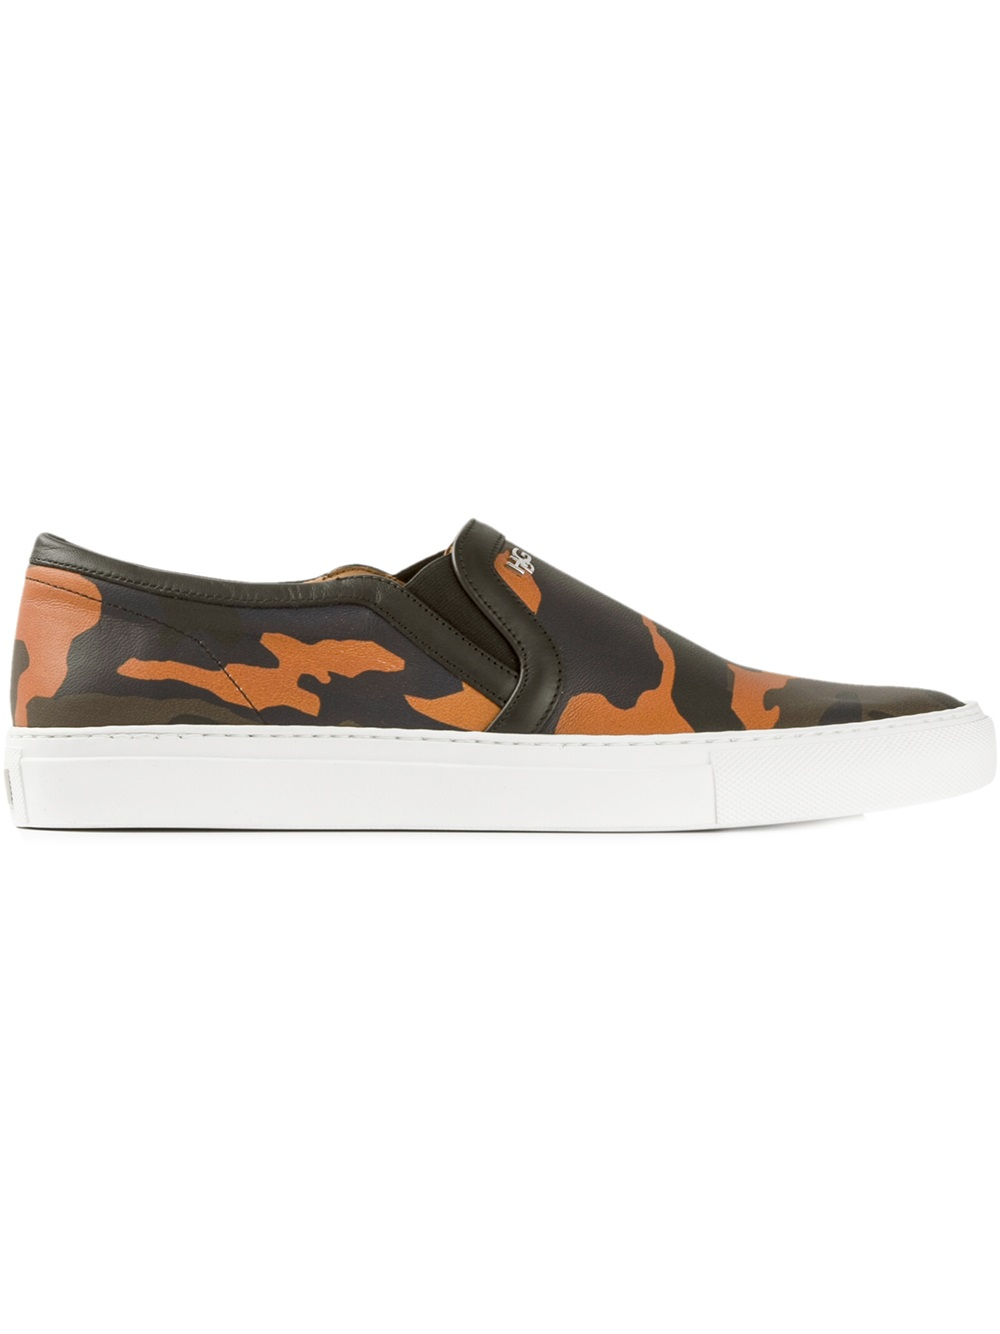 Givenchy Camouflage Slip On Sneakers in Green for Men - Lyst